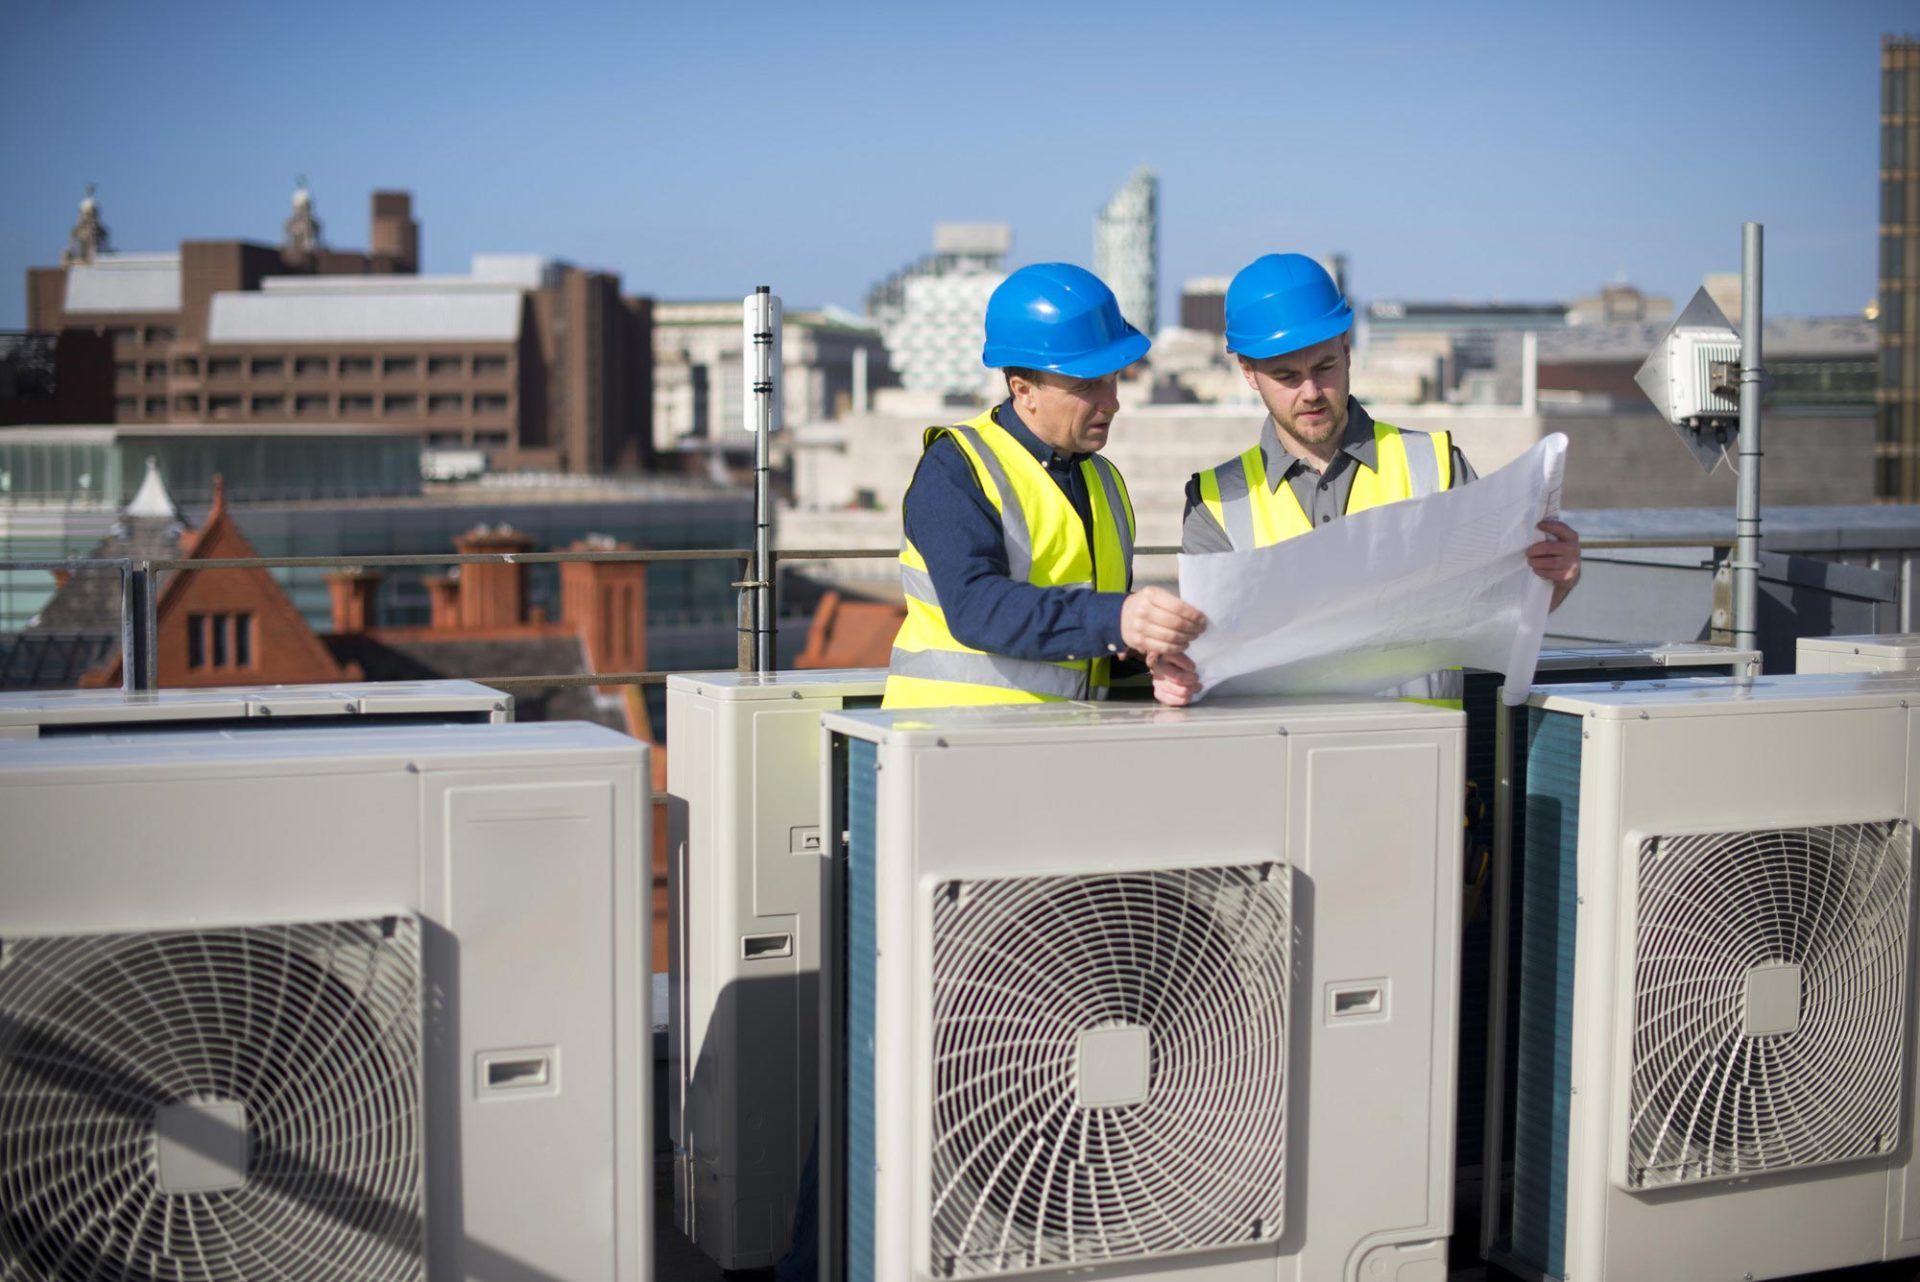 engineers looking at plans next to air conditioning units